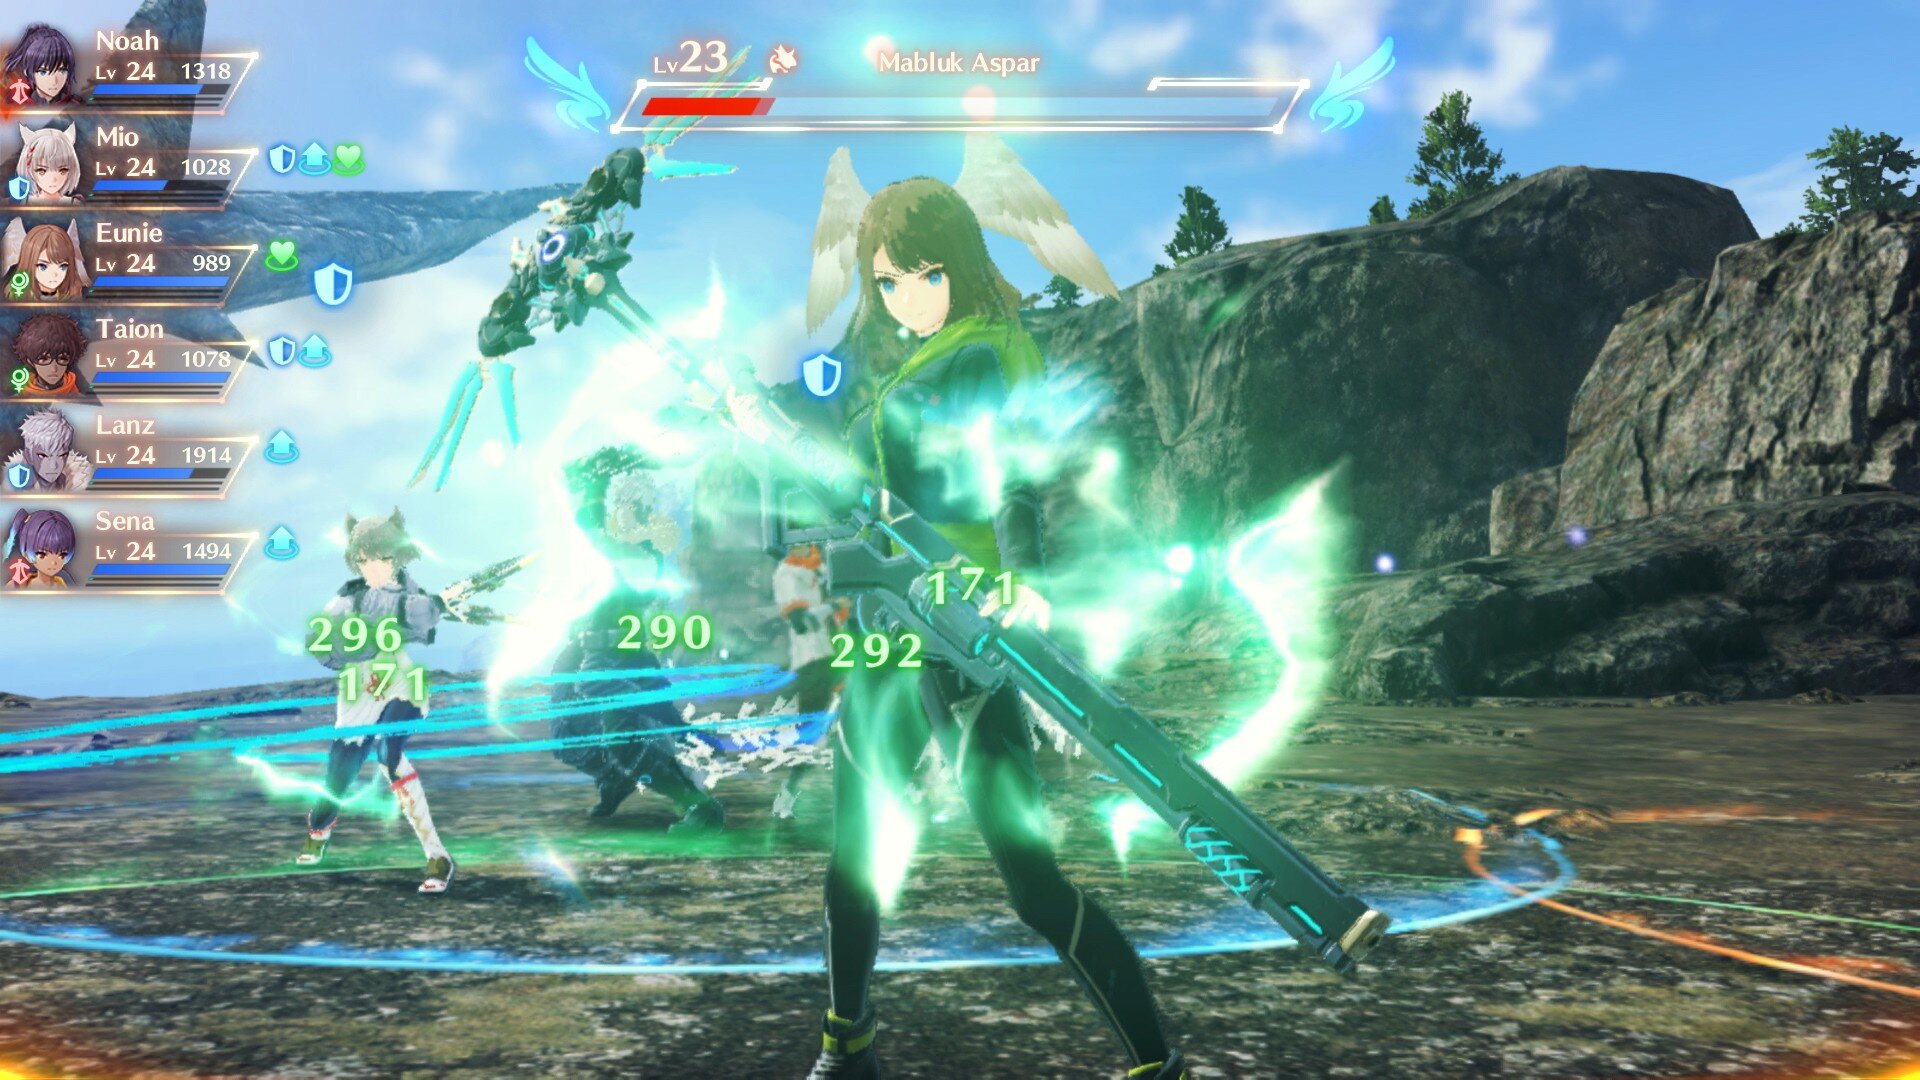 Xenoblade Chronicles 3 Expansion Pass: All DLC waves, roadmap, and release  dates revealed